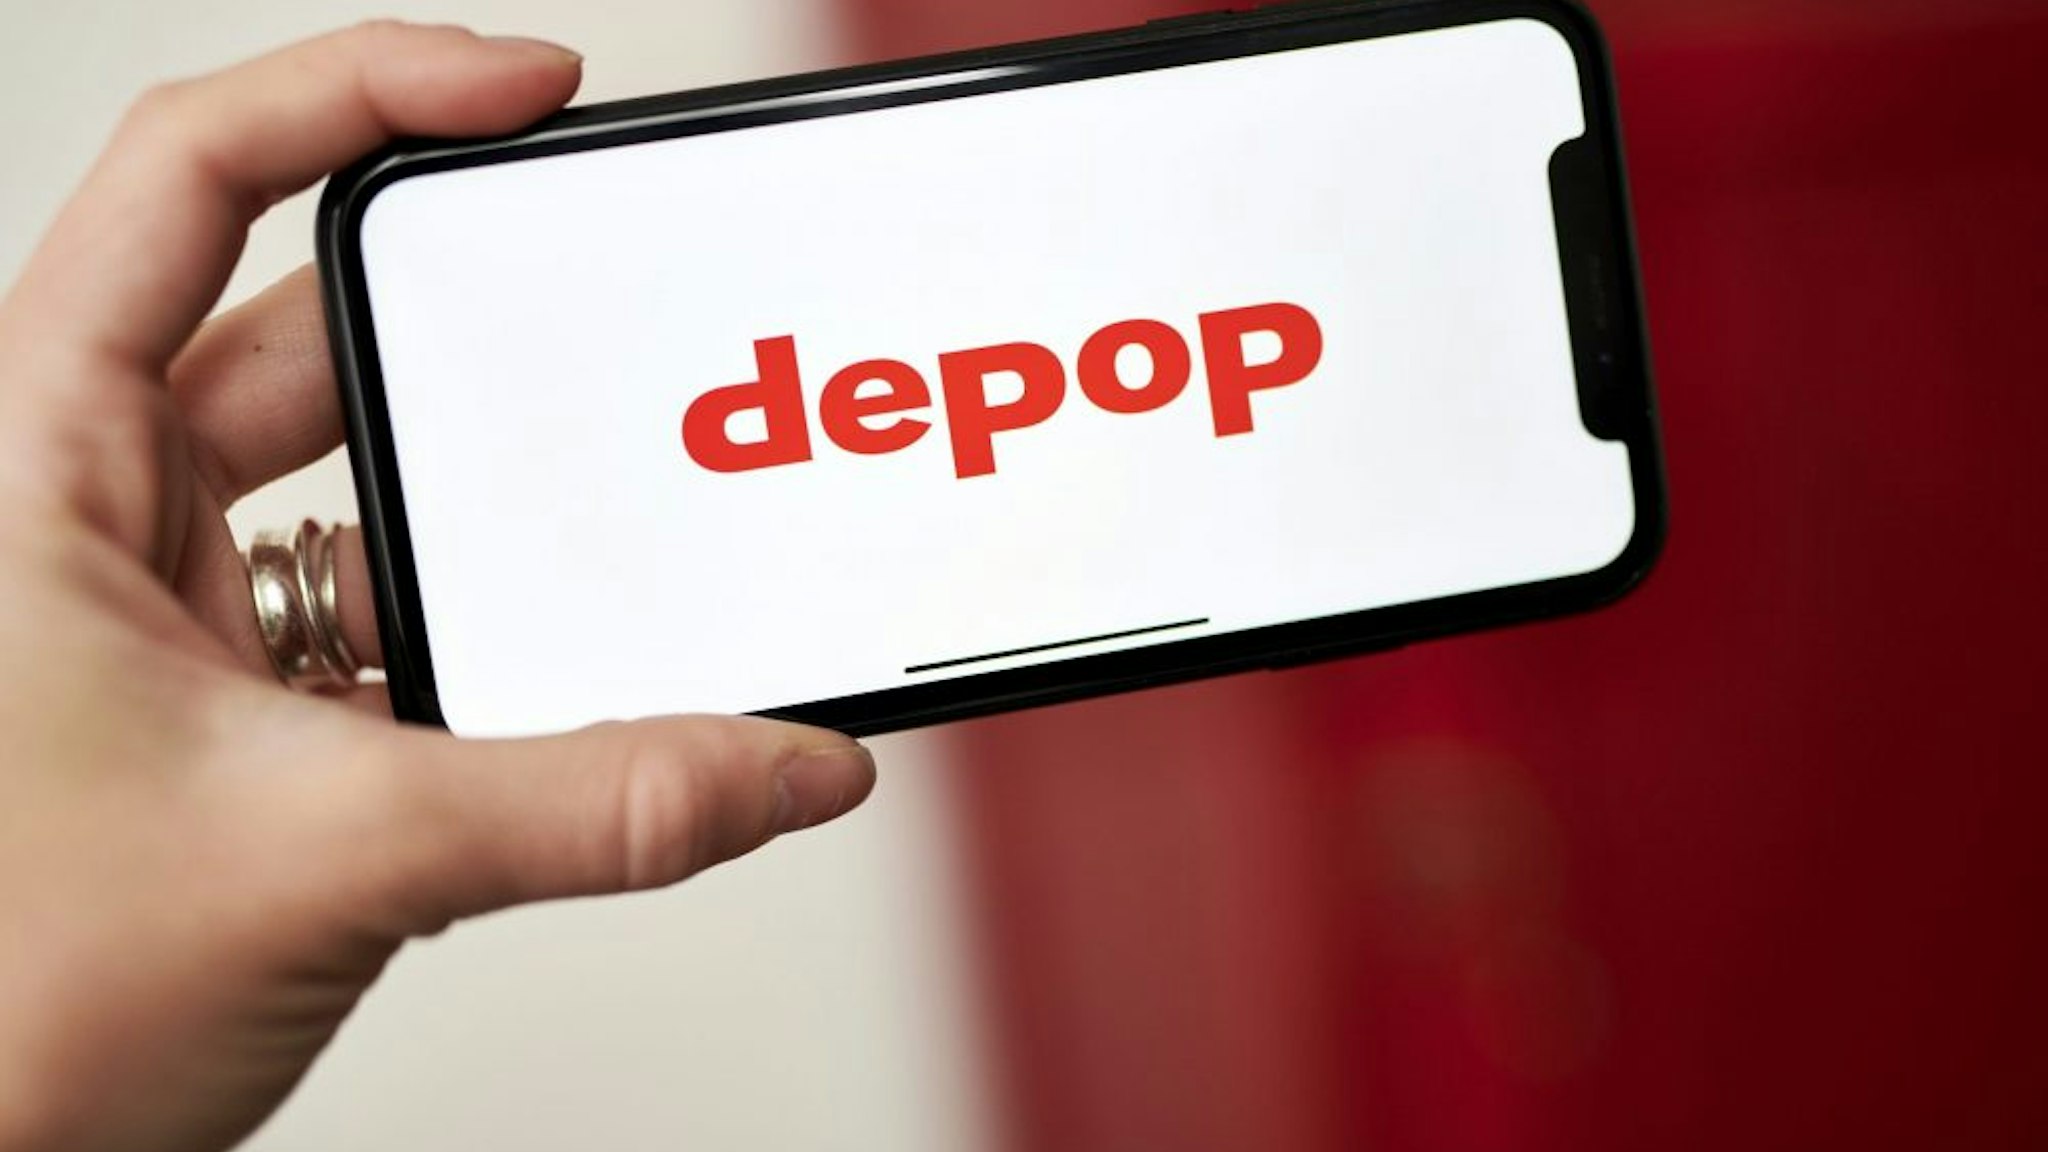 The Depop logo on a smartphone arranged in the Brooklyn borough of New York, U.S., on Wednesday, June 2, 2021. Etsy Inc., the online marketplace for crafts and vintage items, is buying second-hand fashion app Depop for $1.63 billion as it seeks to expand its customer base and attract younger users.